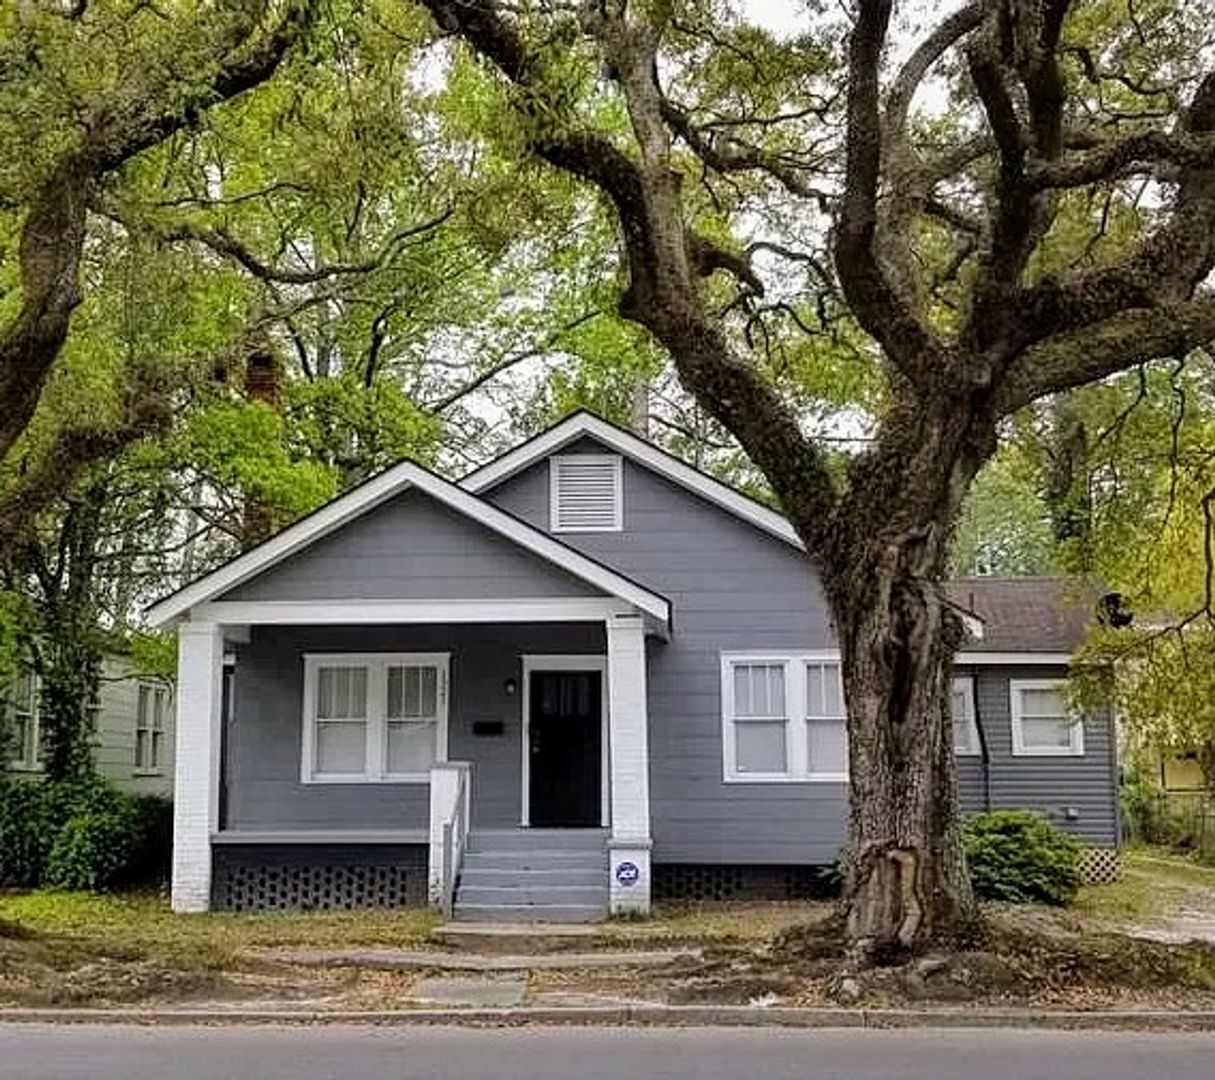 Large 3BR/2BA Downtown Home Walking Distance to Daffin Park